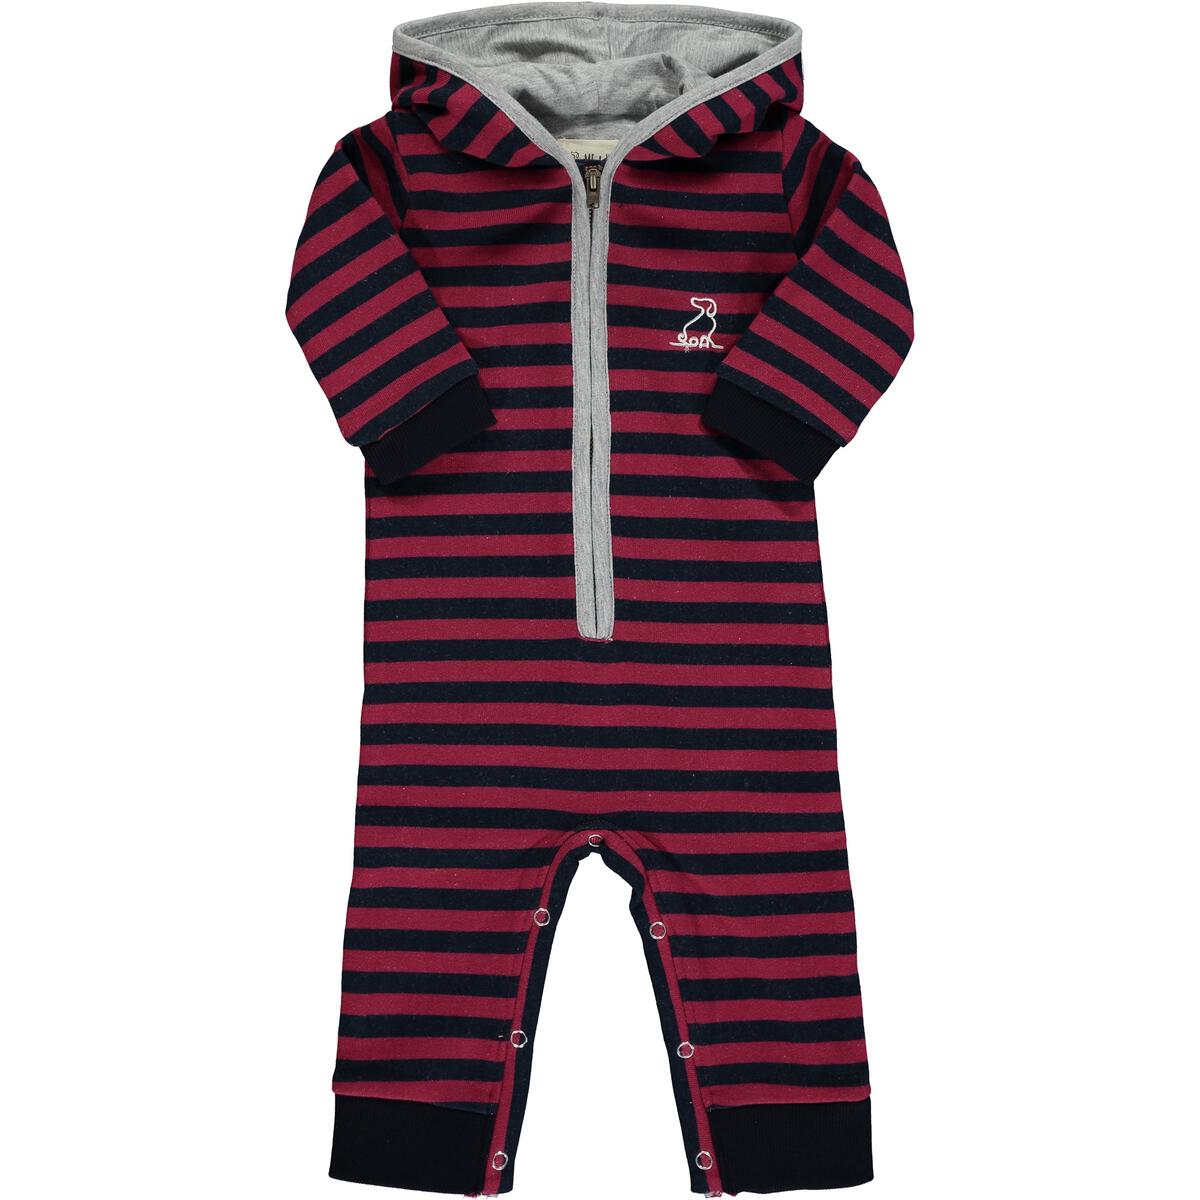 Me and Henry BLAINE Hooded romper